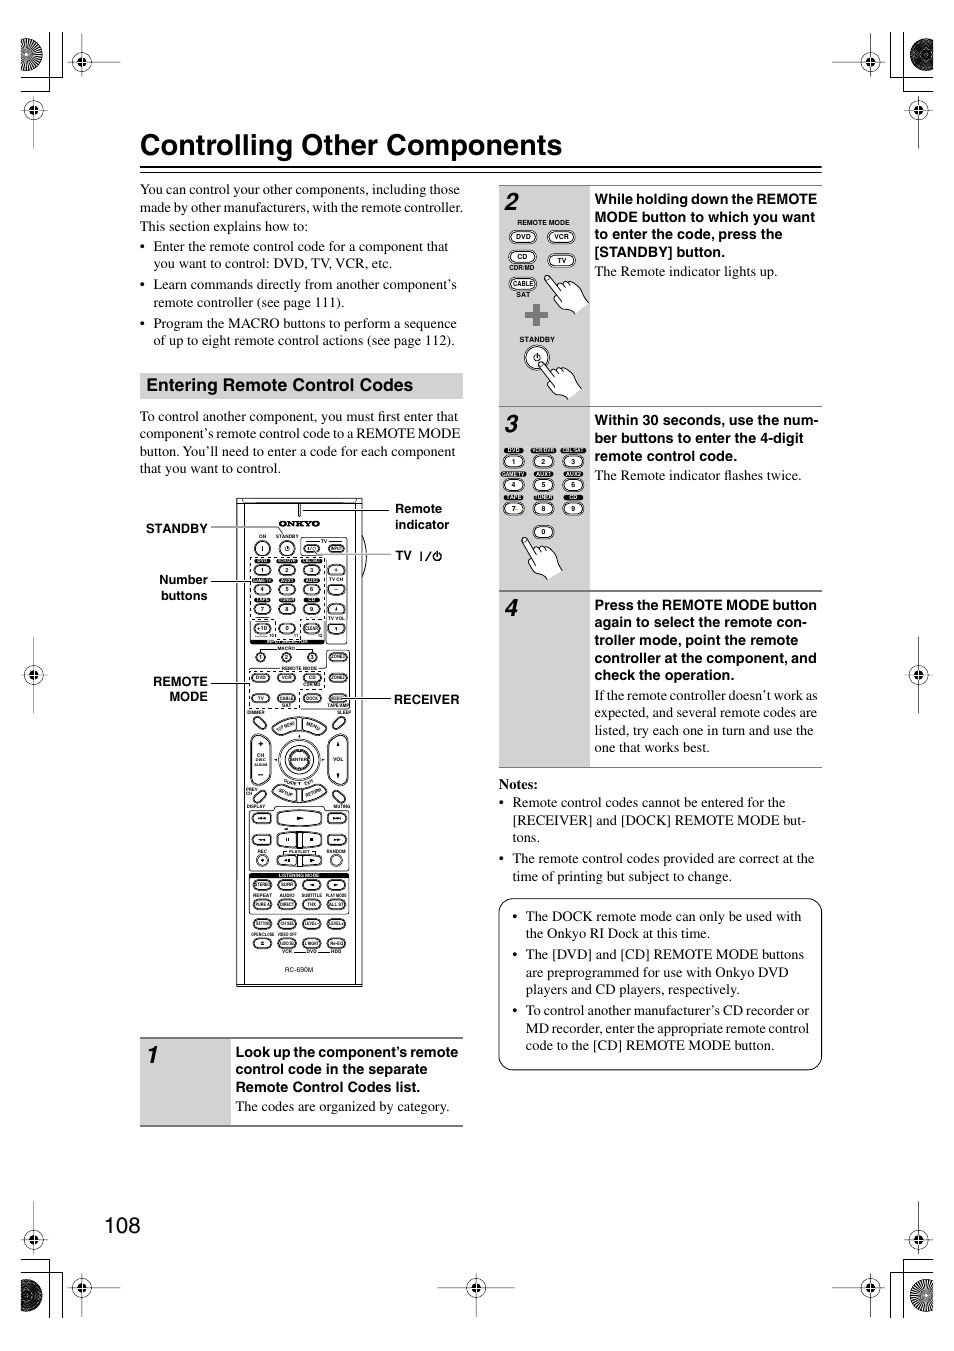 Controlling other components, Entering remote control codes | Onkyo TX SR805  User Manual | Page 108 / 120 | Original mode